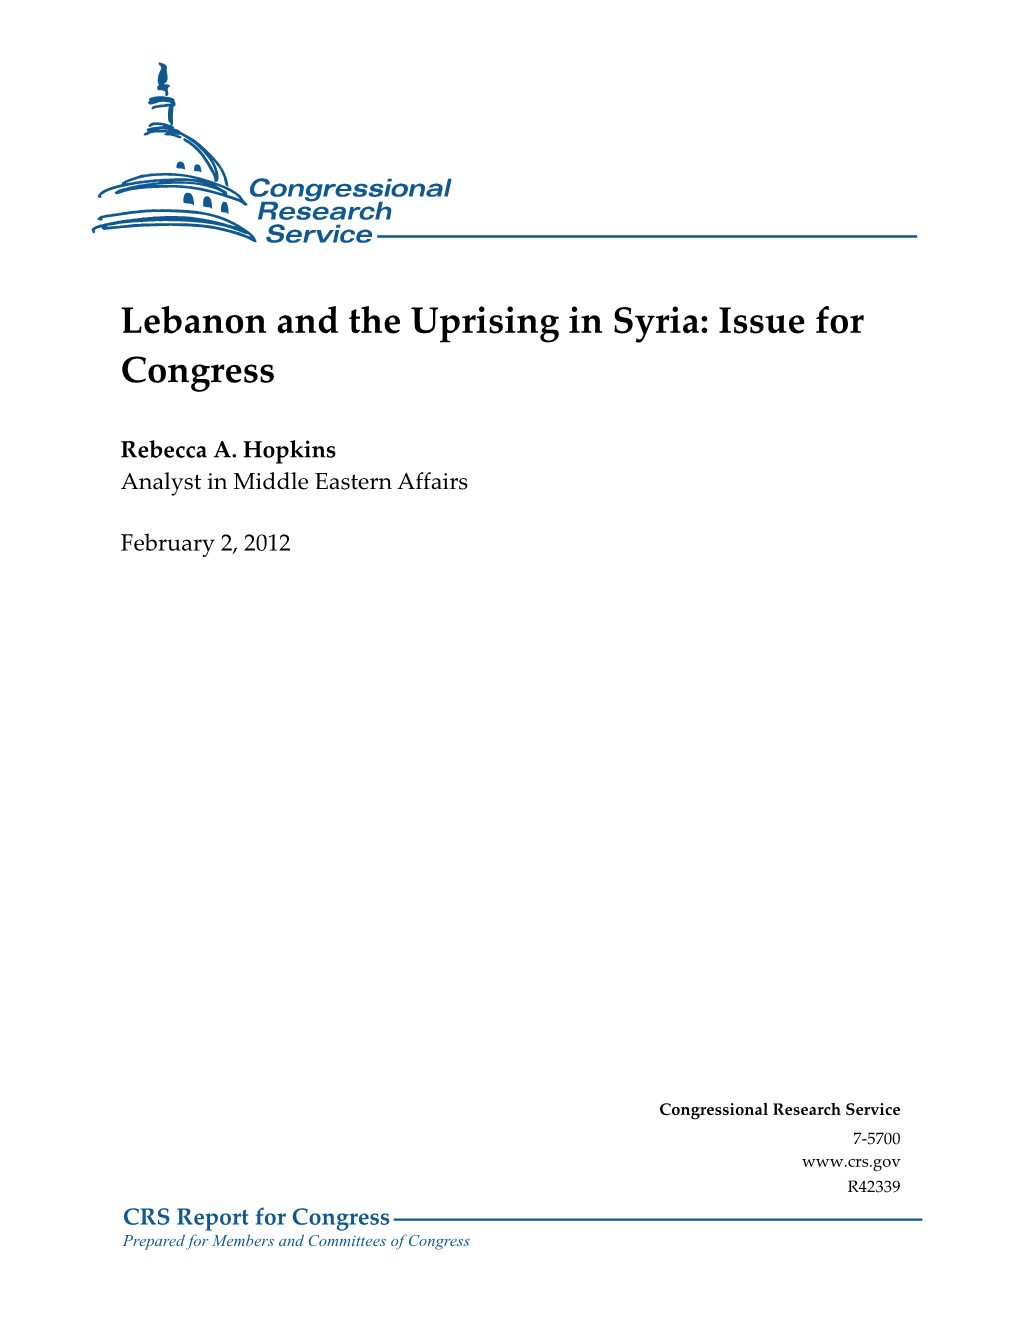 Lebanon and the Uprising in Syria: Issue for Congress